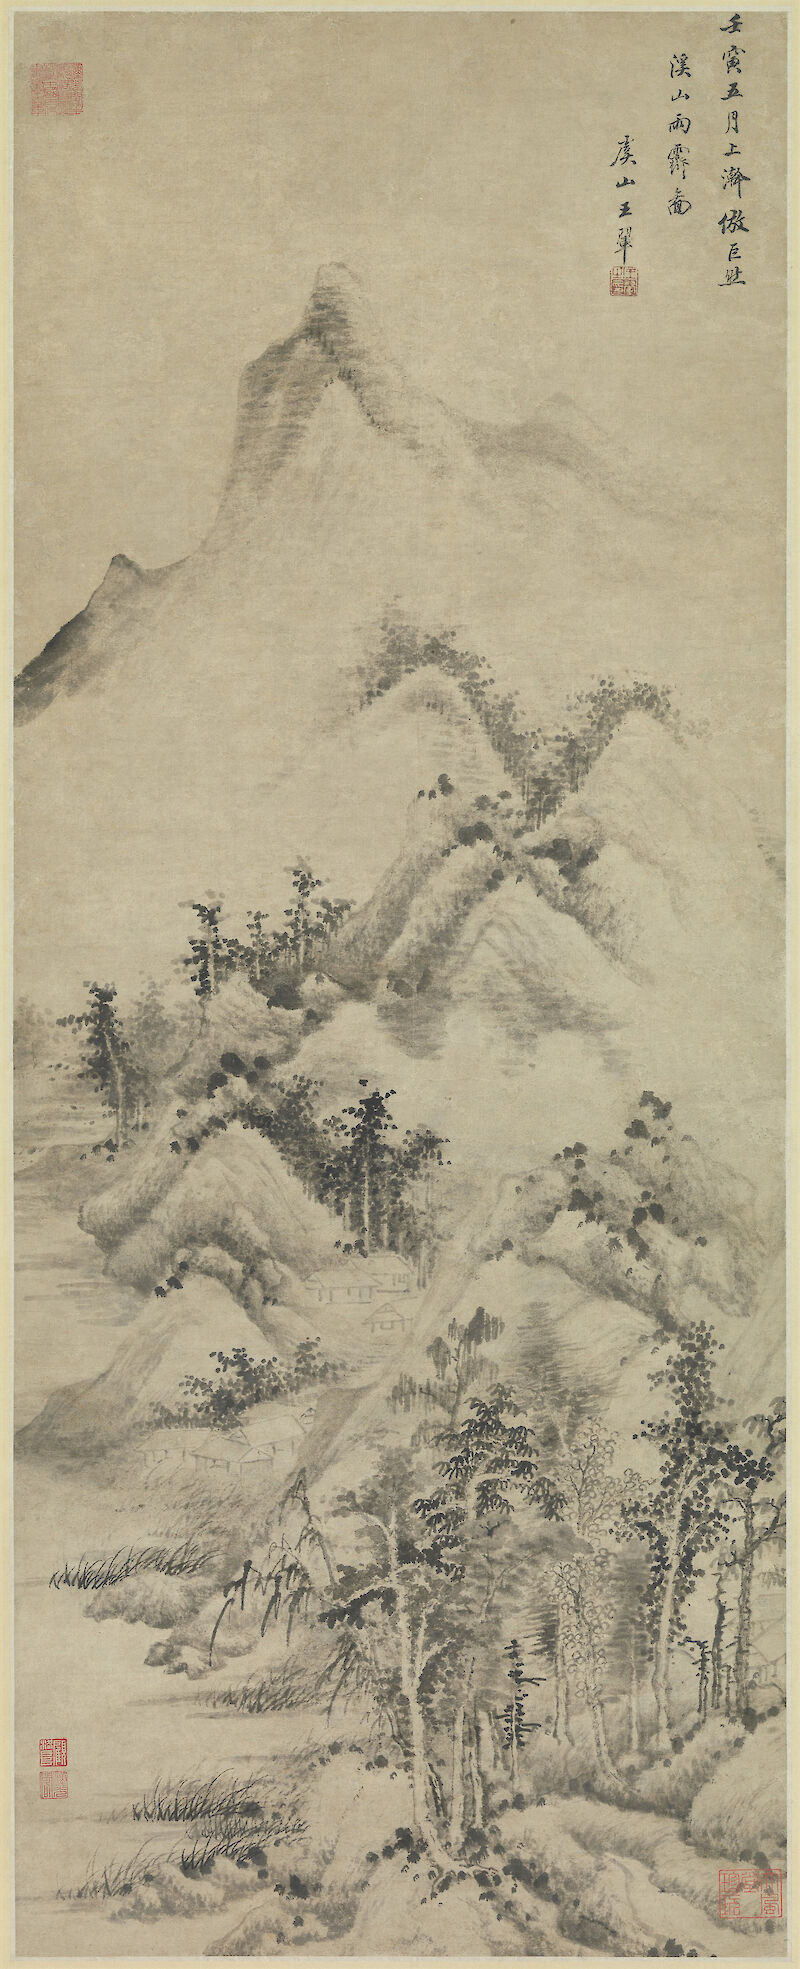 Clearing after Rain over Streams and Mountains, Wang Hui 王翚